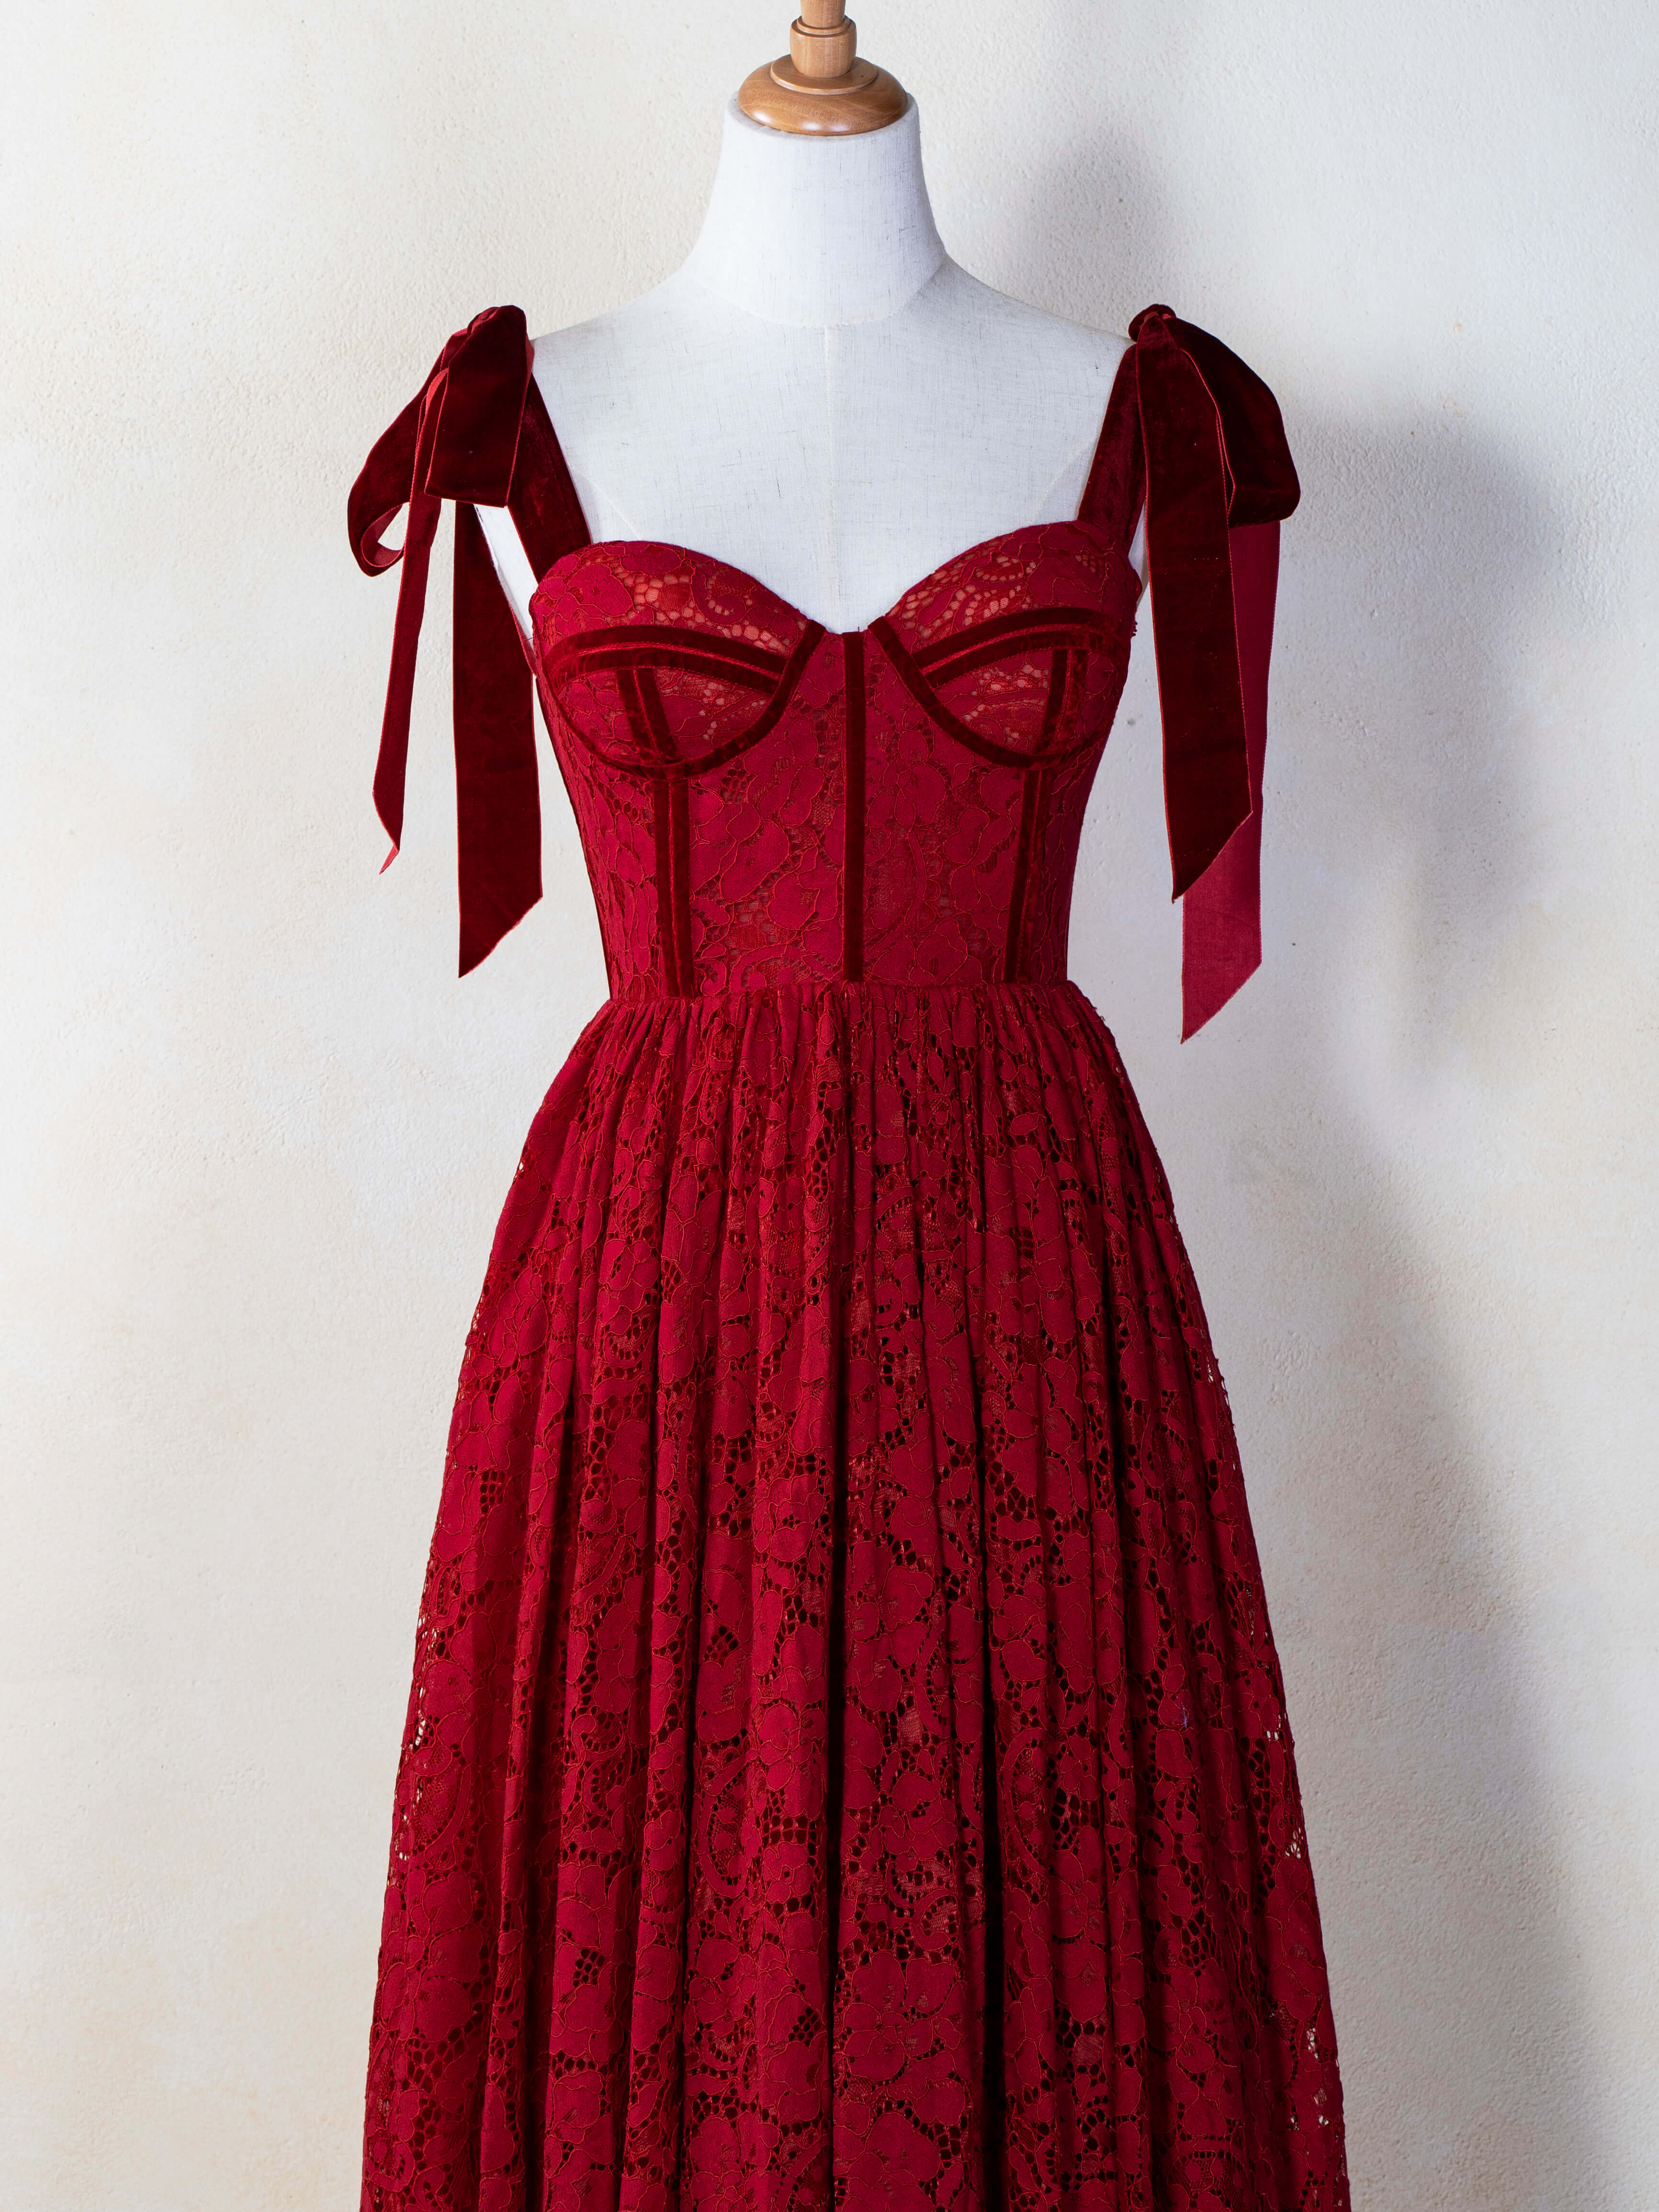 lace red dress